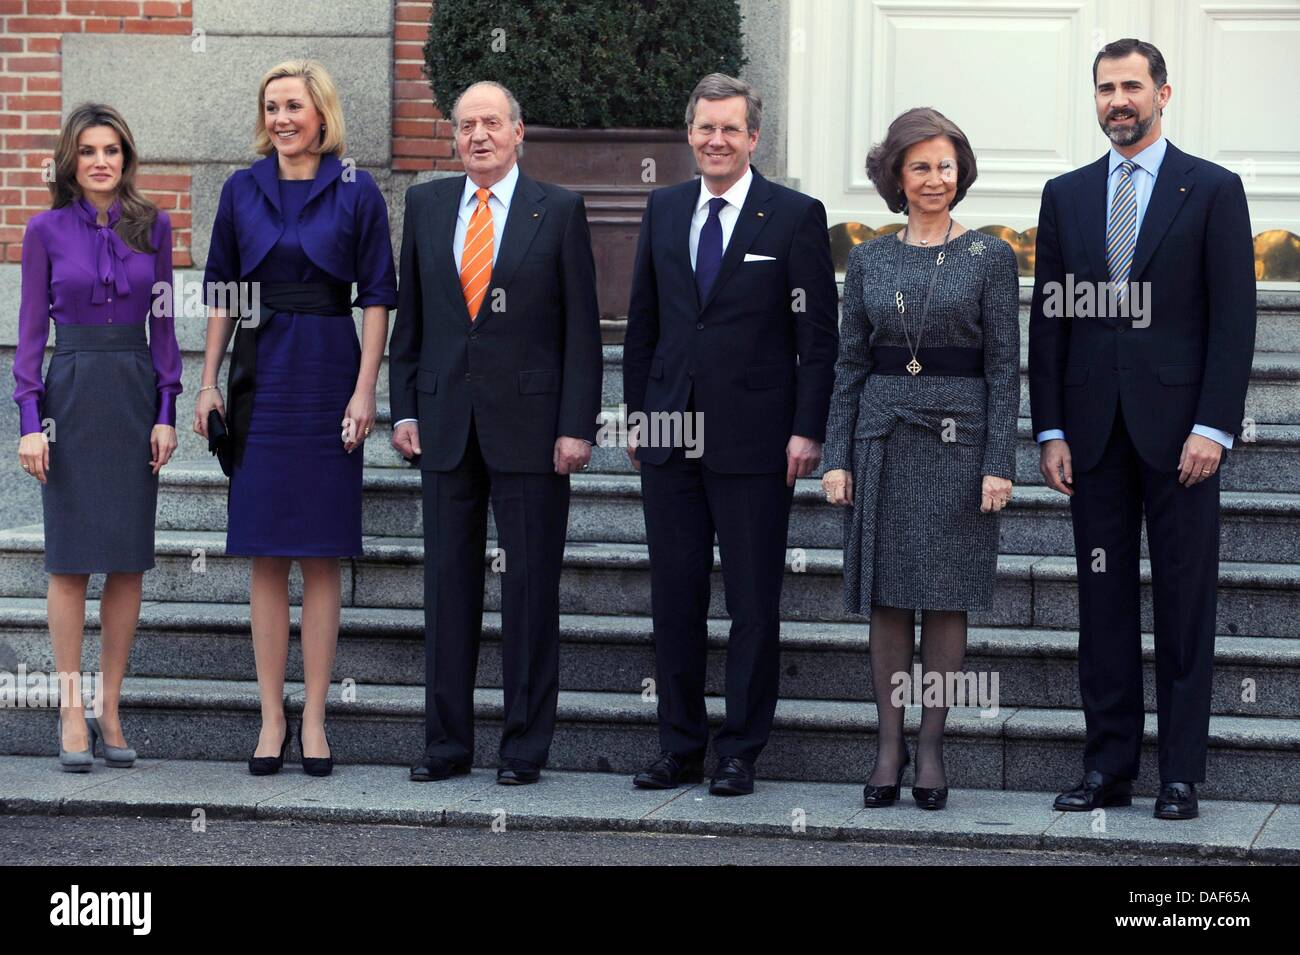 King Juan Carlos I. (3-L), Queen Sofia (2-R) of Spain, Crown Prince Felipe (R), Princess Letizia (L), as well as German President Christian Wullf and his wife Bettina are pictured at the Zarzuela Palace in Madrid, Spain, 10 February 2011. Wulff and his wife are on a trip to Spain and Portugal until 11 february 2011. Photo: RAINER JENSEN Stock Photo